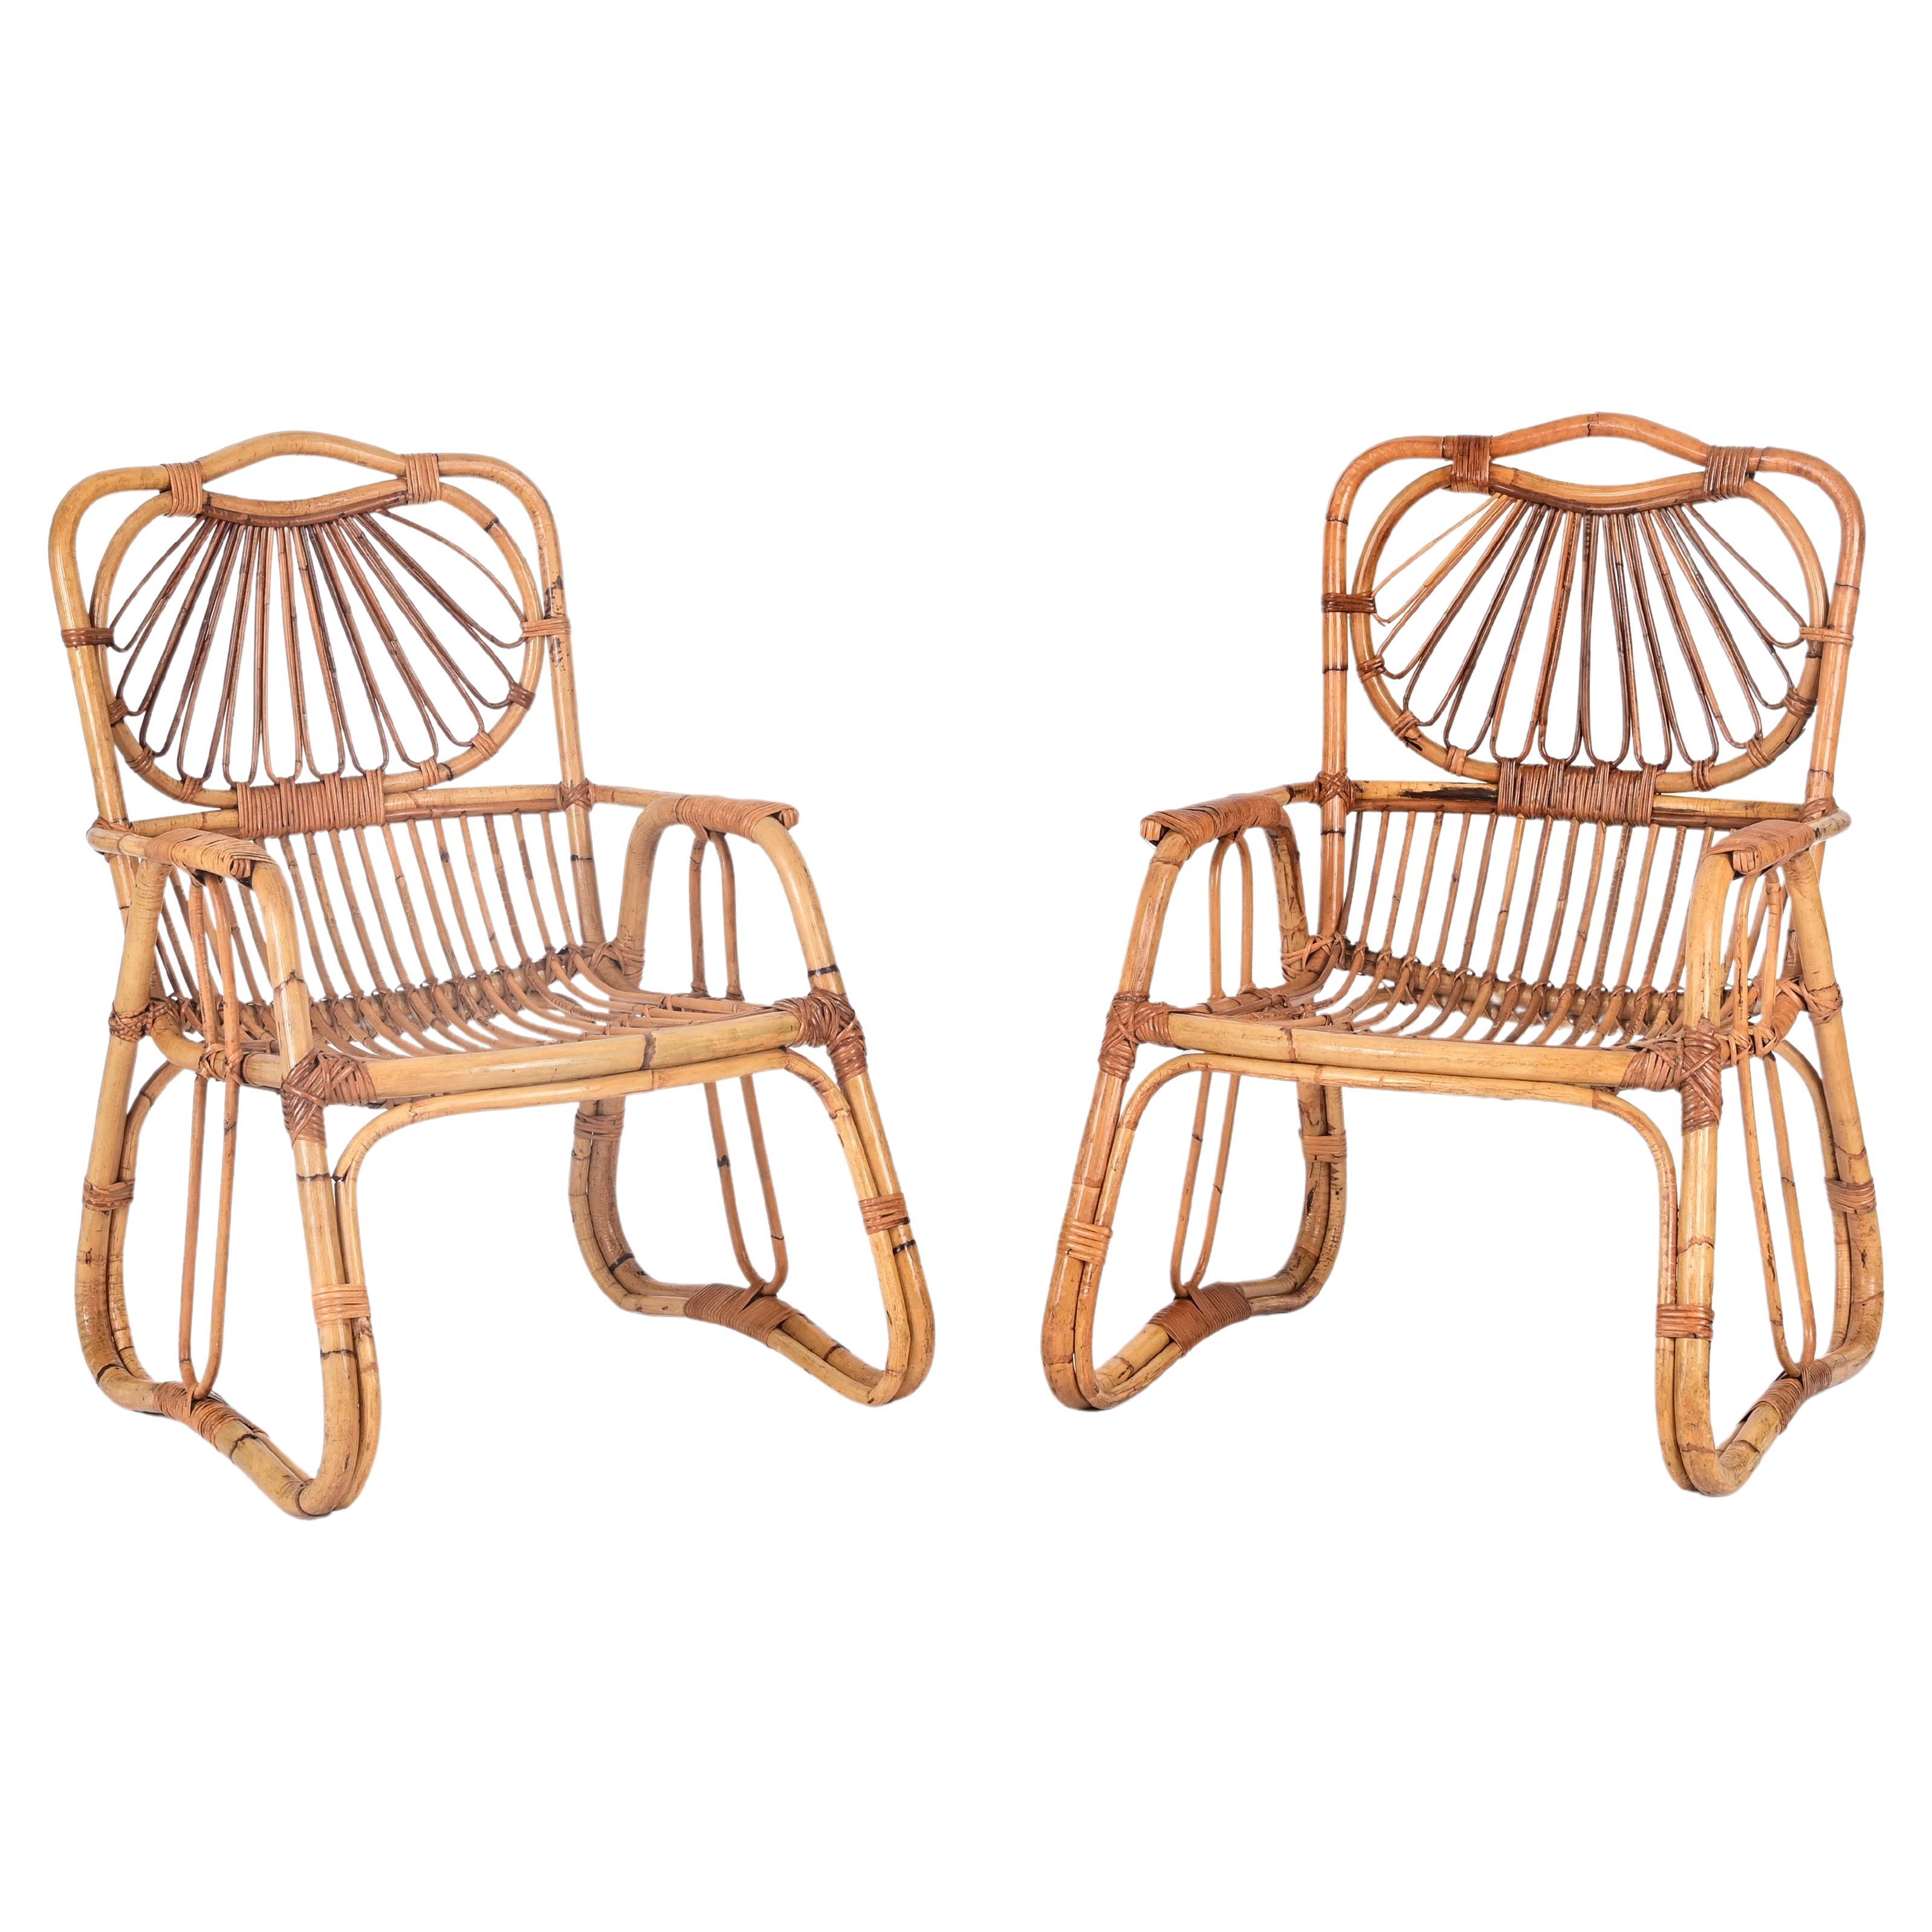 Pair of Giovanni Travasa Bamboo, Rattan and Wicker Italian Armchairs, 1960s For Sale